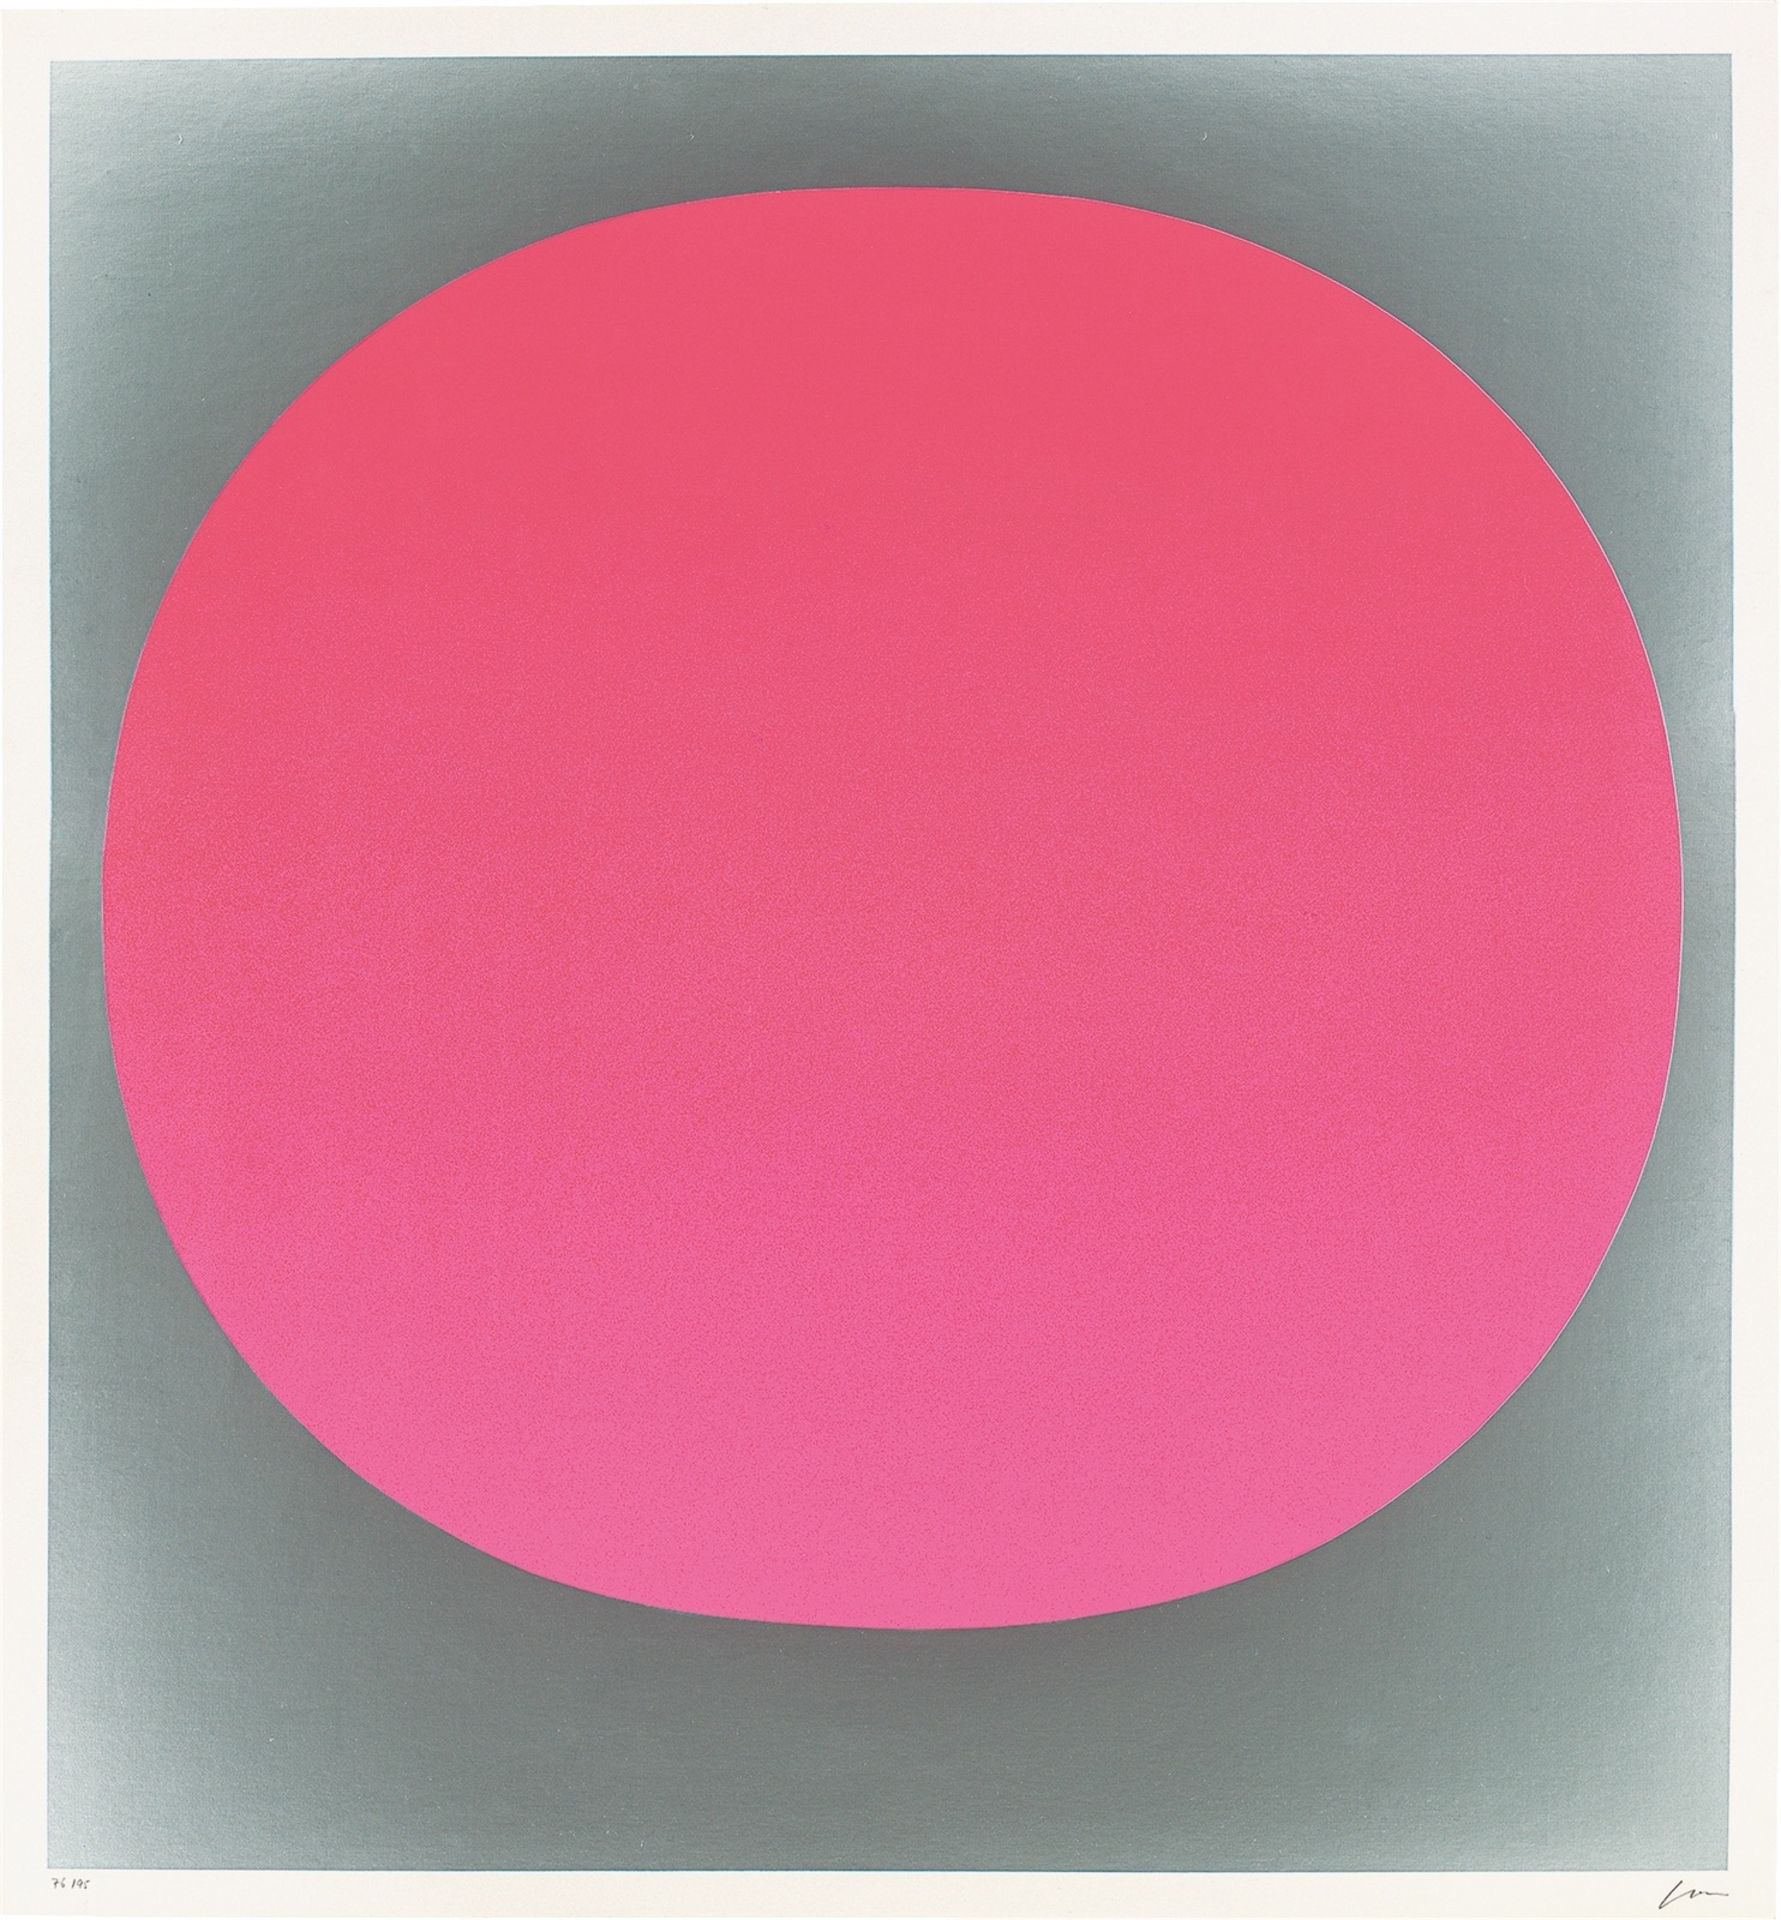 Rupprecht Geiger. Untitled, from ”Colour in the round”. 1969 - Image 5 of 5